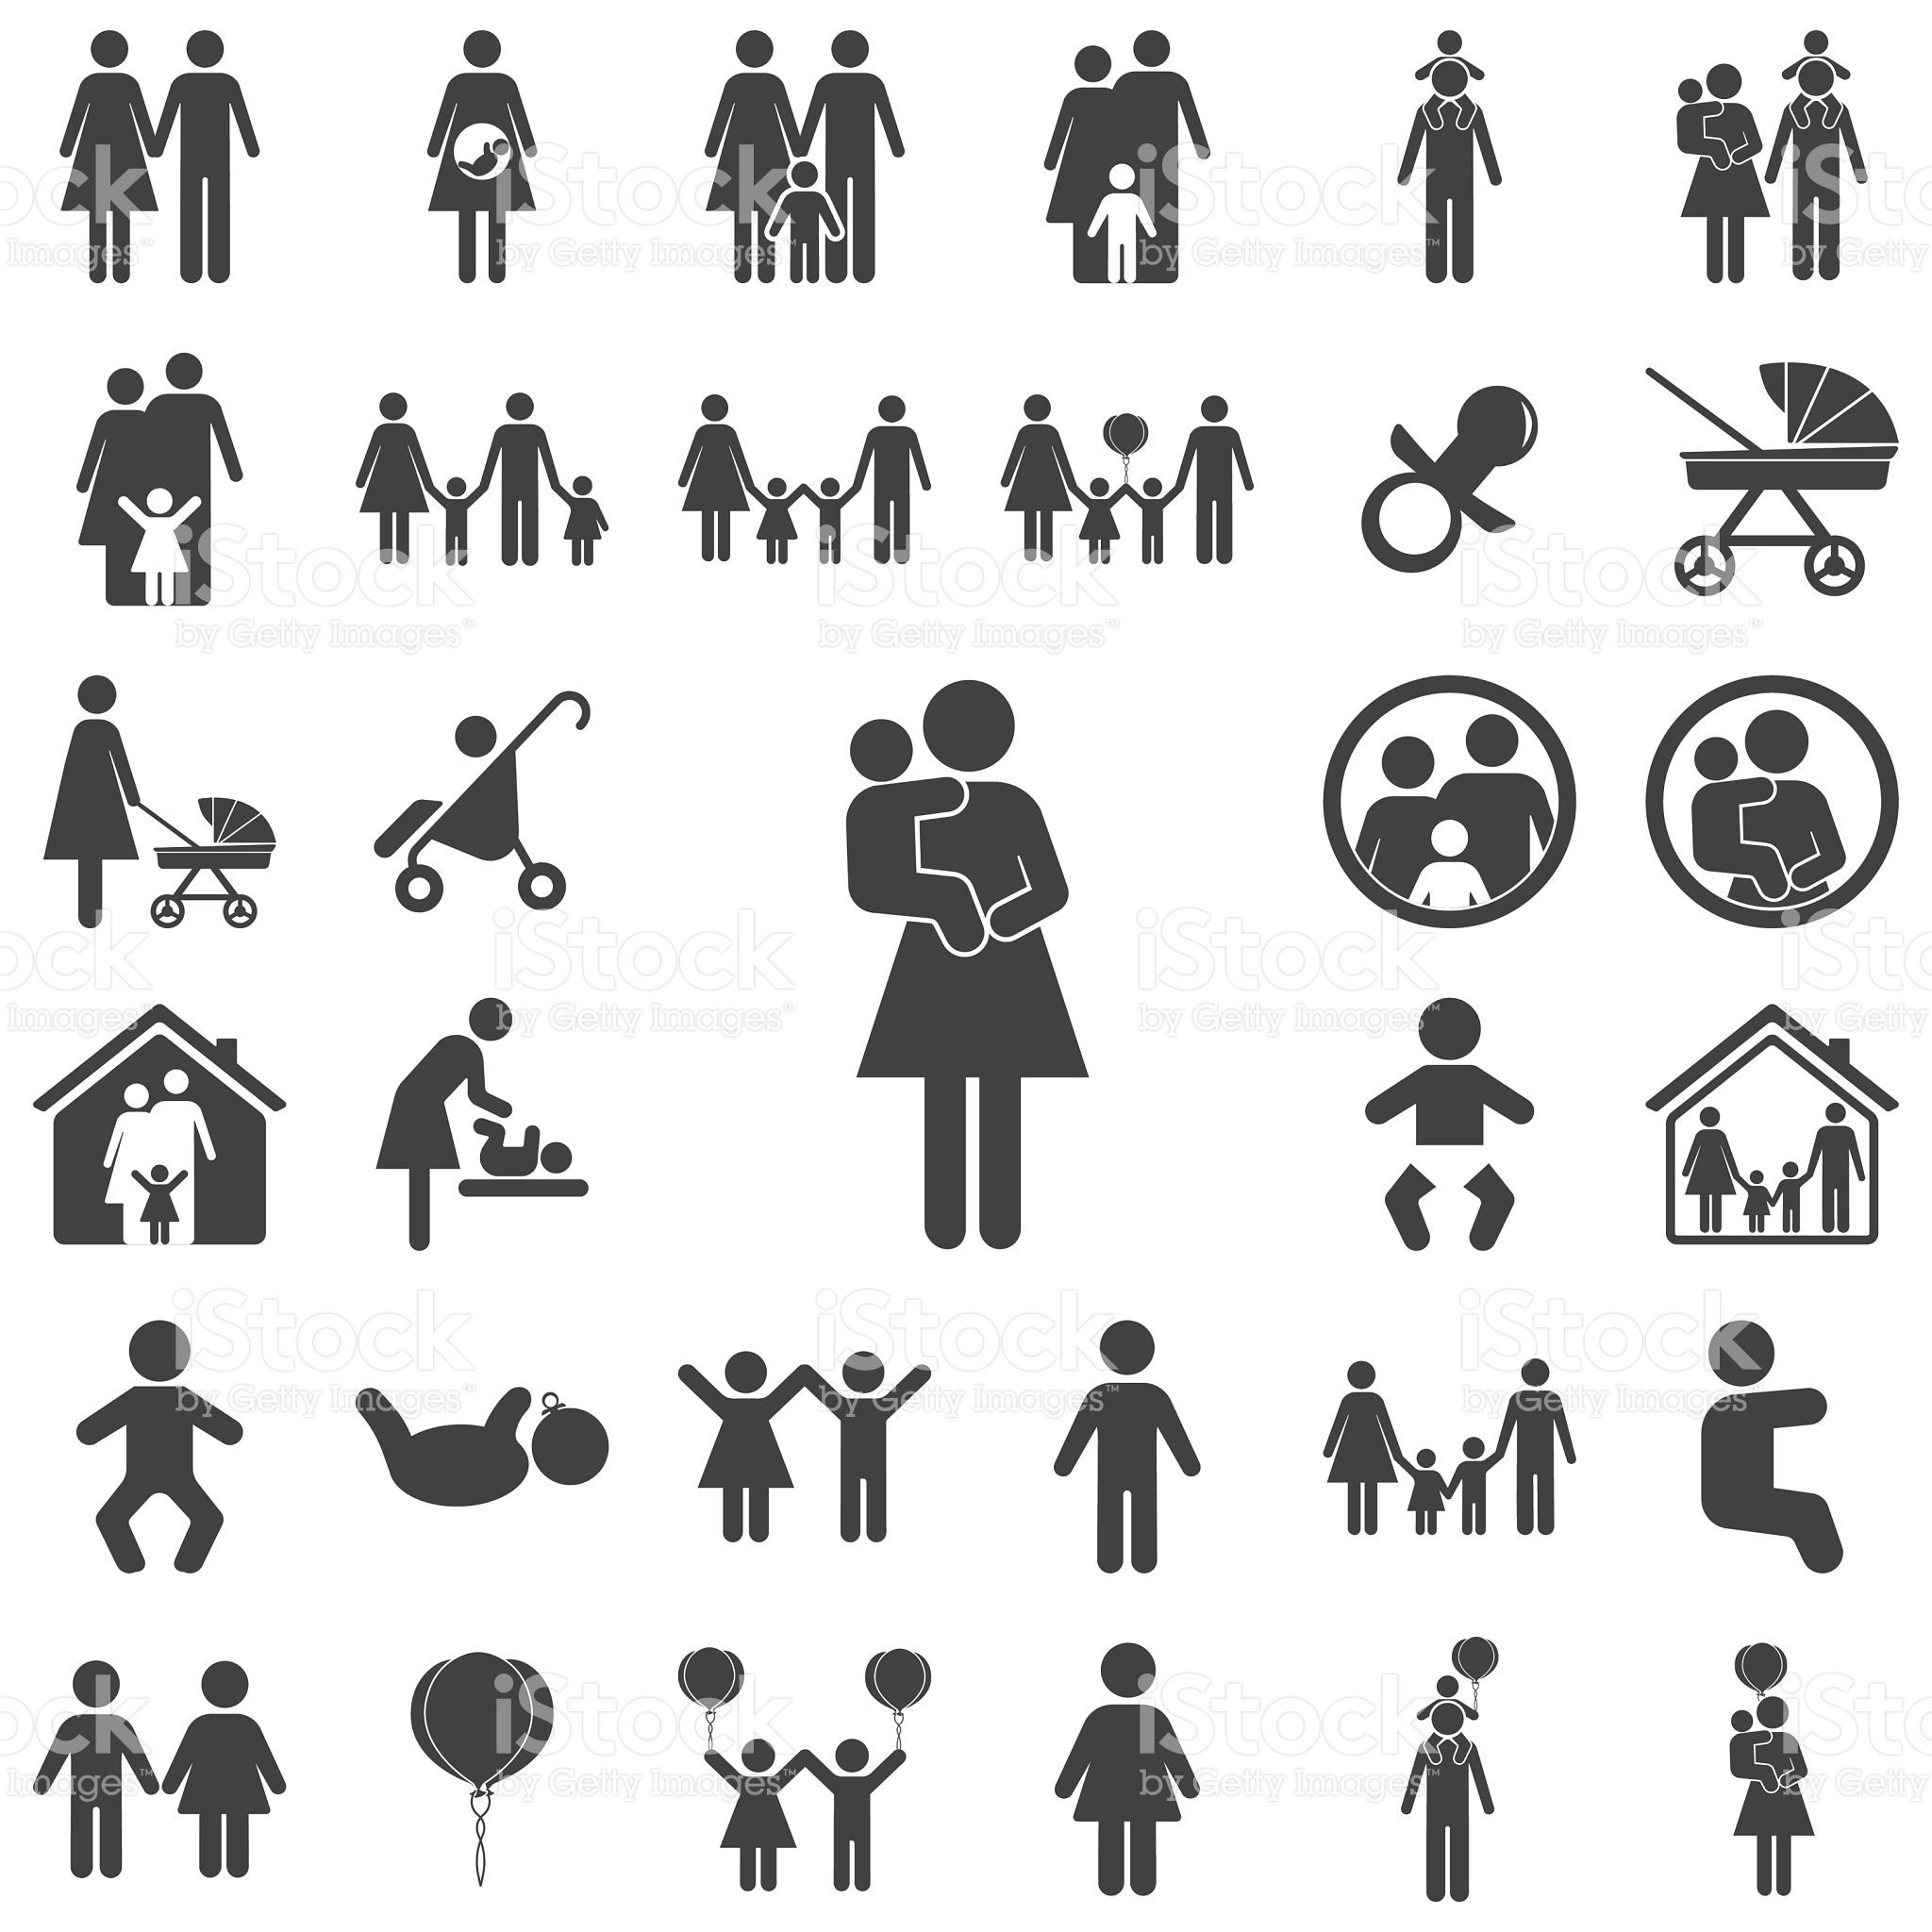 Mother and child vector symbol icon on the white background